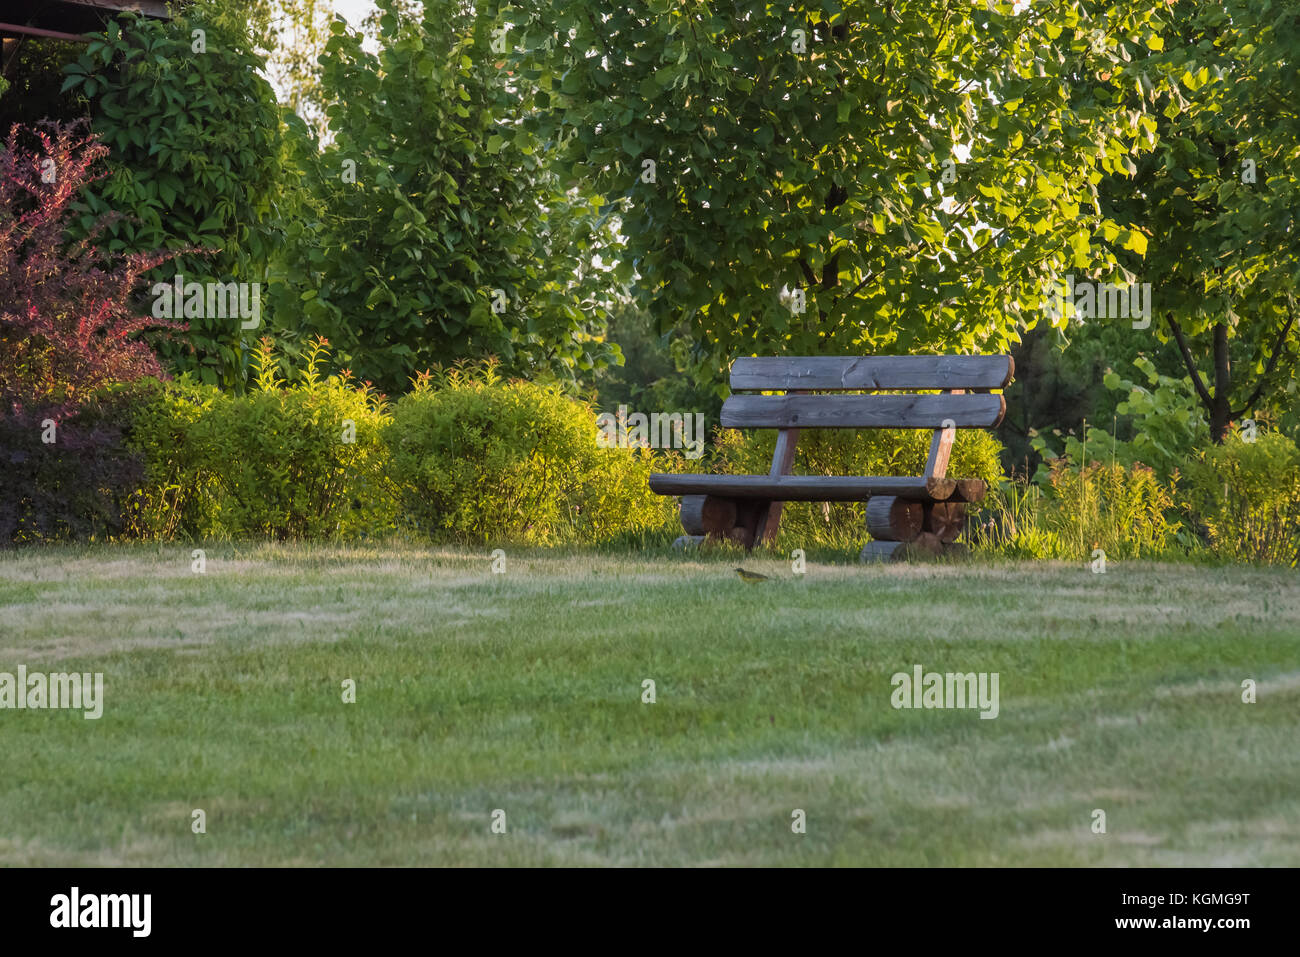 Old handmade wooden bench standing on lawn in the park or garden. Unfocused background. Stock Photo